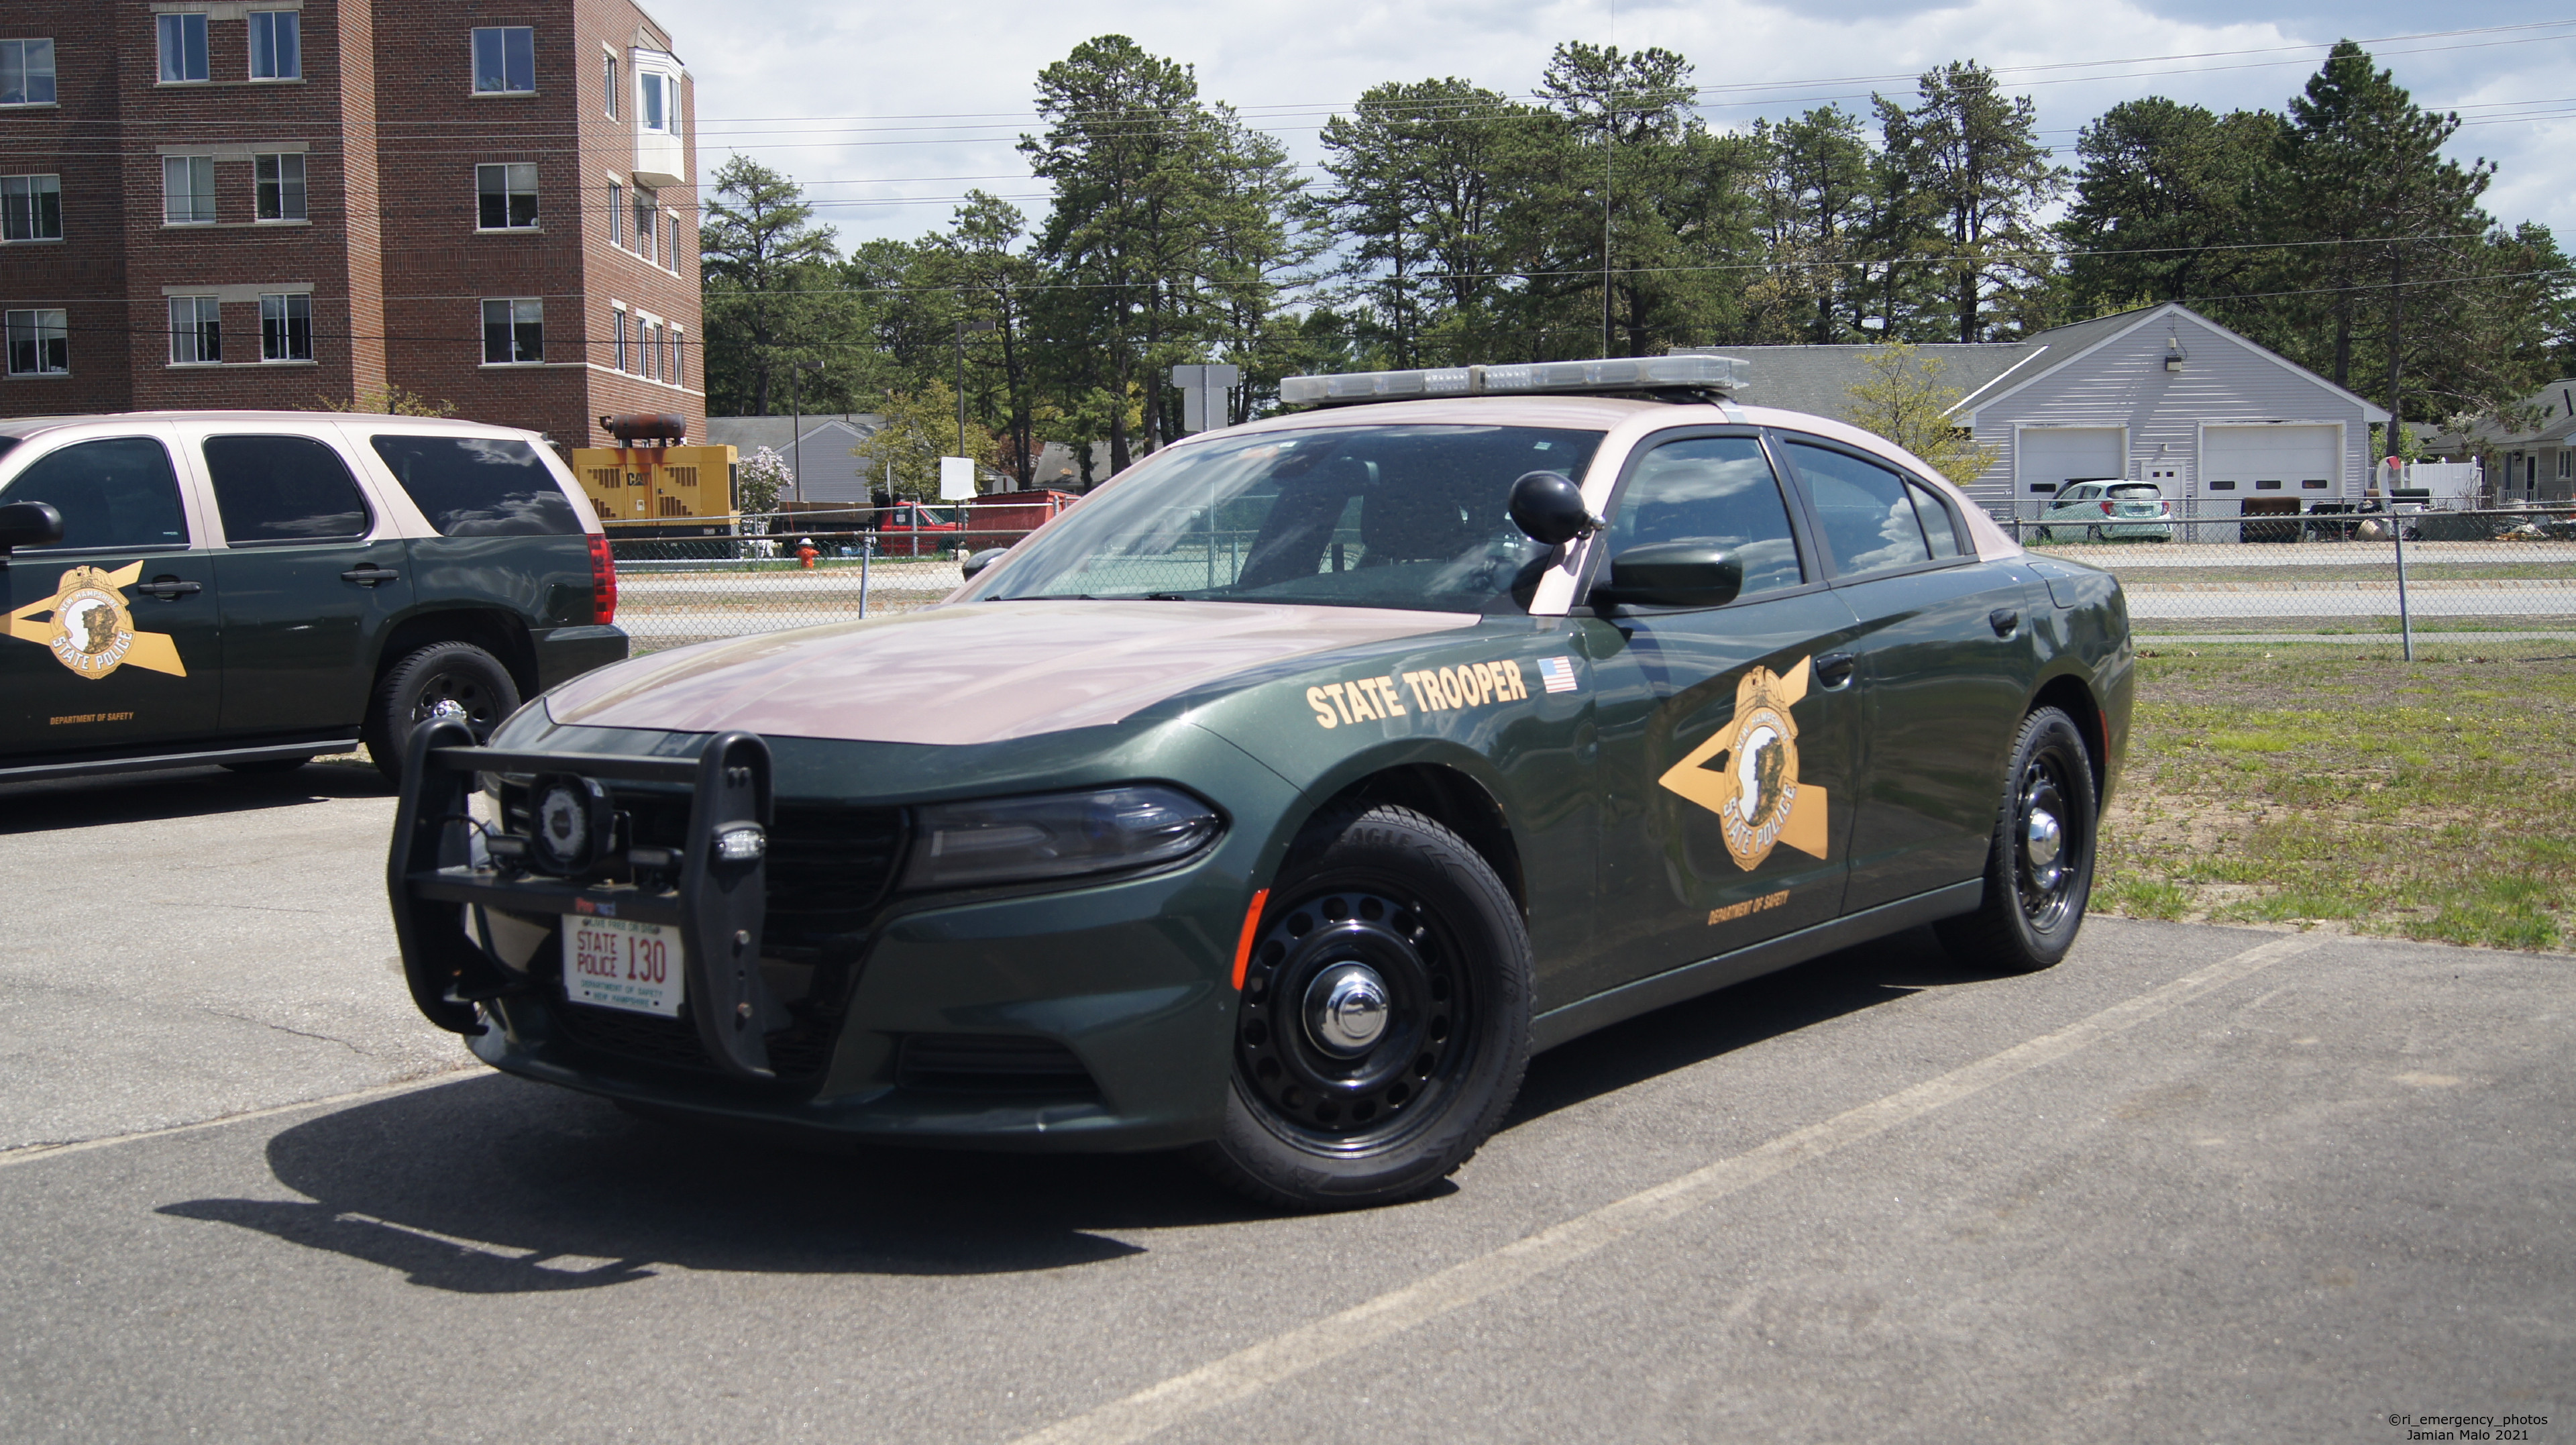 A photo  of New Hampshire State Police
            Cruiser 130, a 2015-2019 Dodge Charger             taken by Jamian Malo